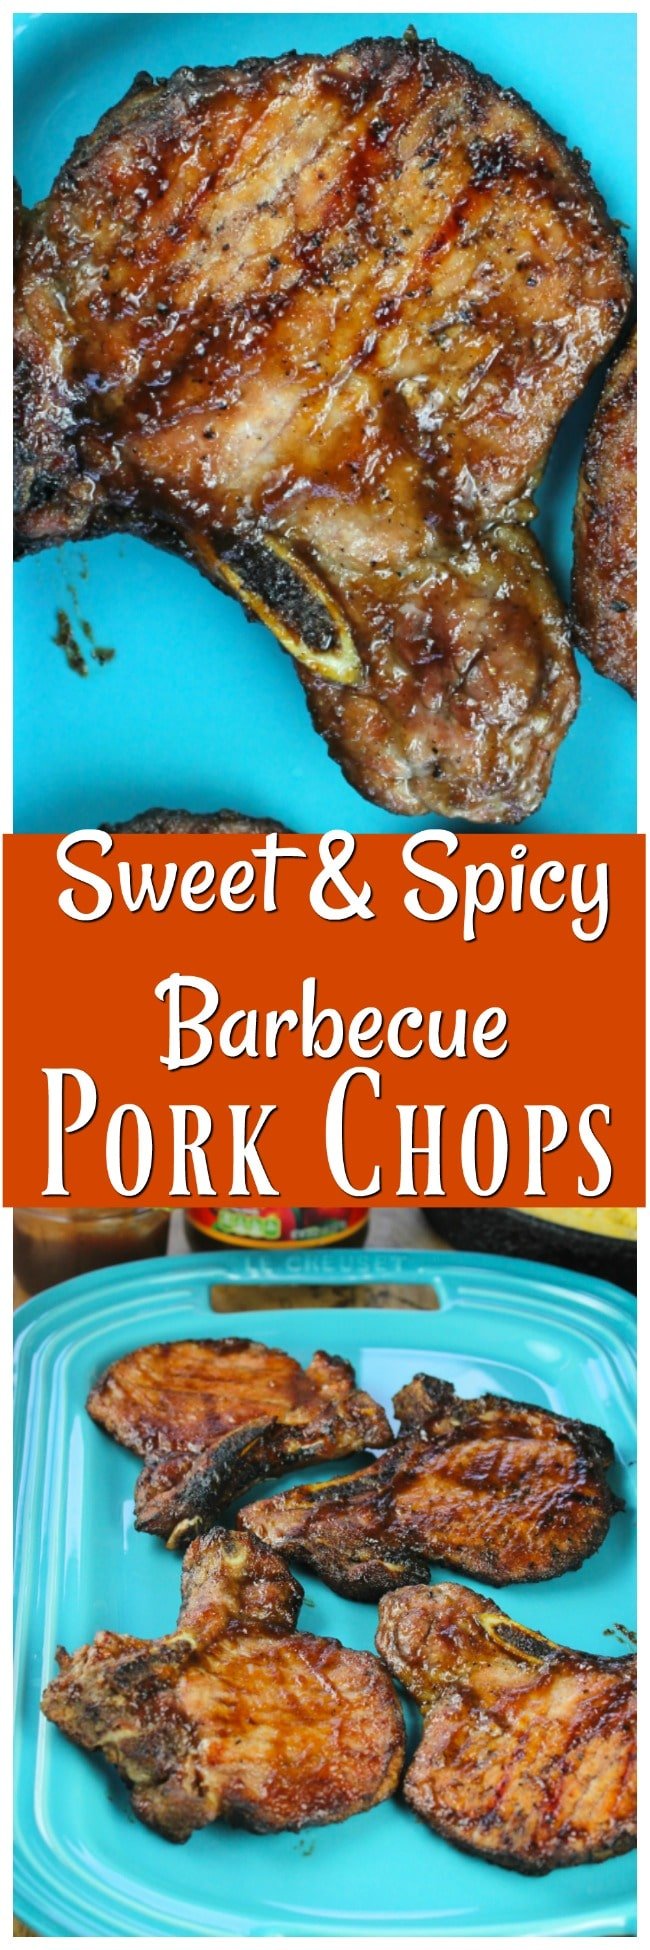 Sweet and Spicy Barbecue Pork Chops - Miss in the Kitchen